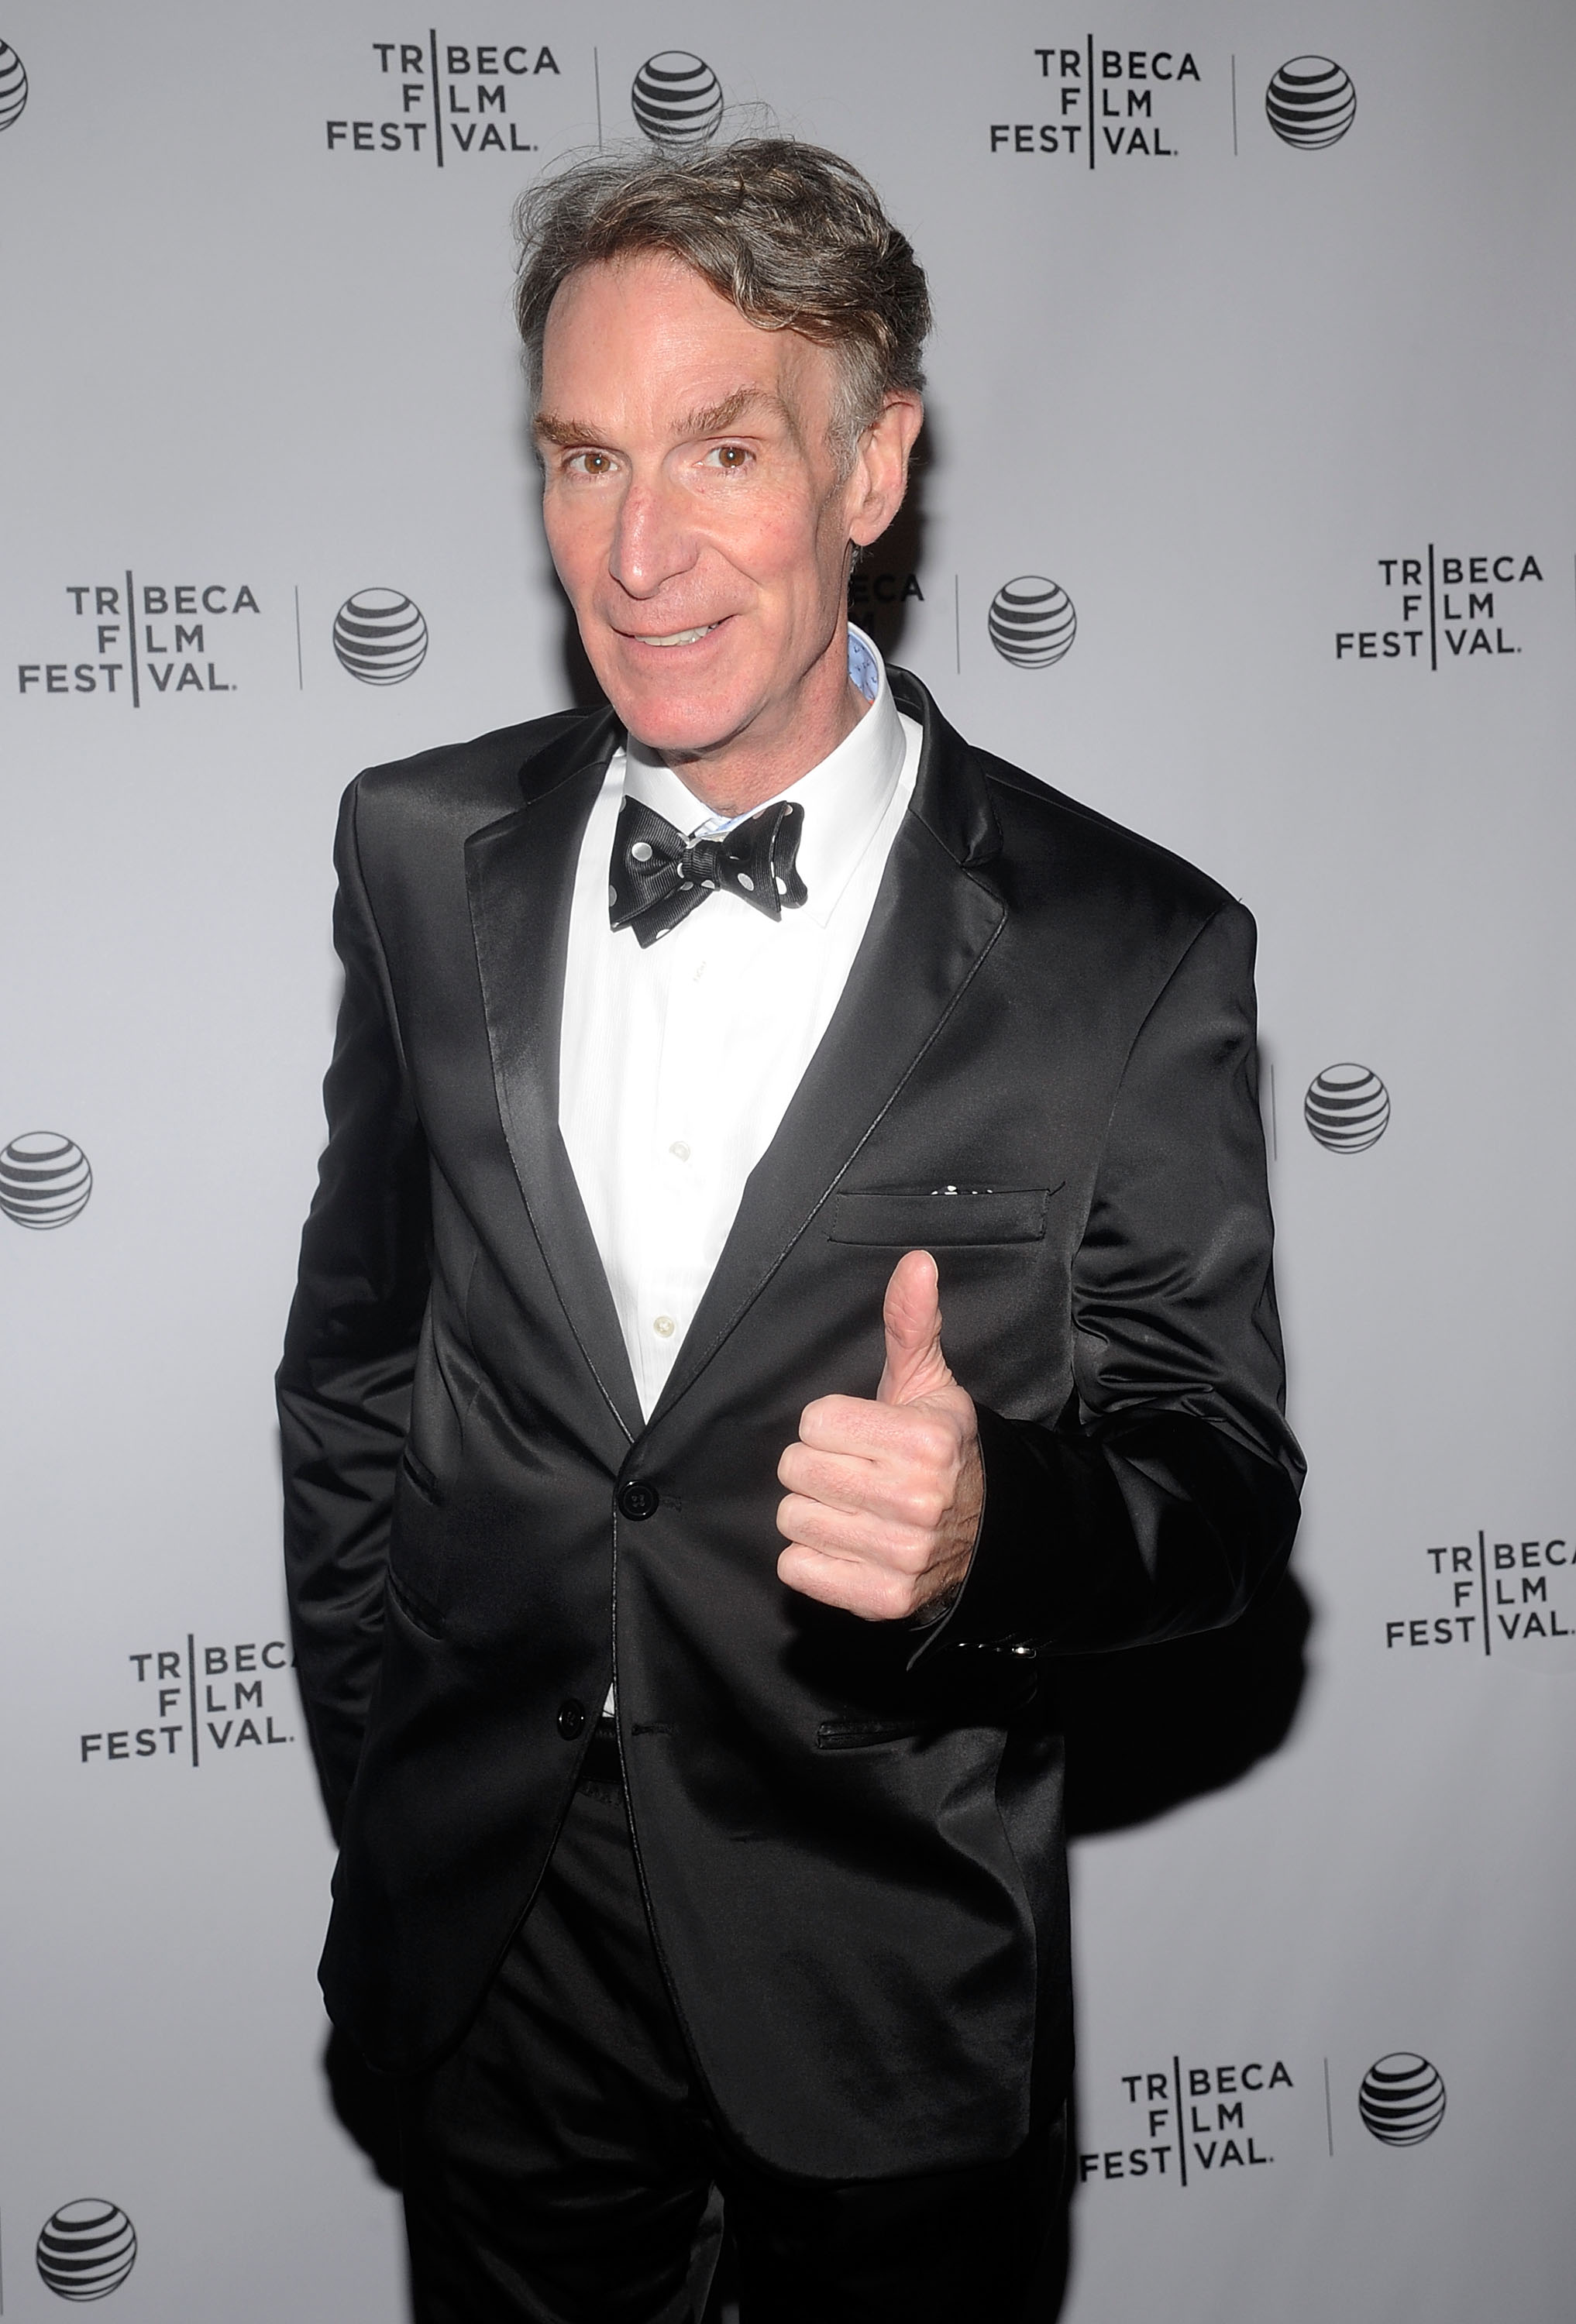 American science educator Bill Nye attends "An Honest Liar" Premiere during the 2014 Tribeca Film Festival at SVA Theater on April 18, 2014 in New York City. (Daniel Zuchnik—WireImage)